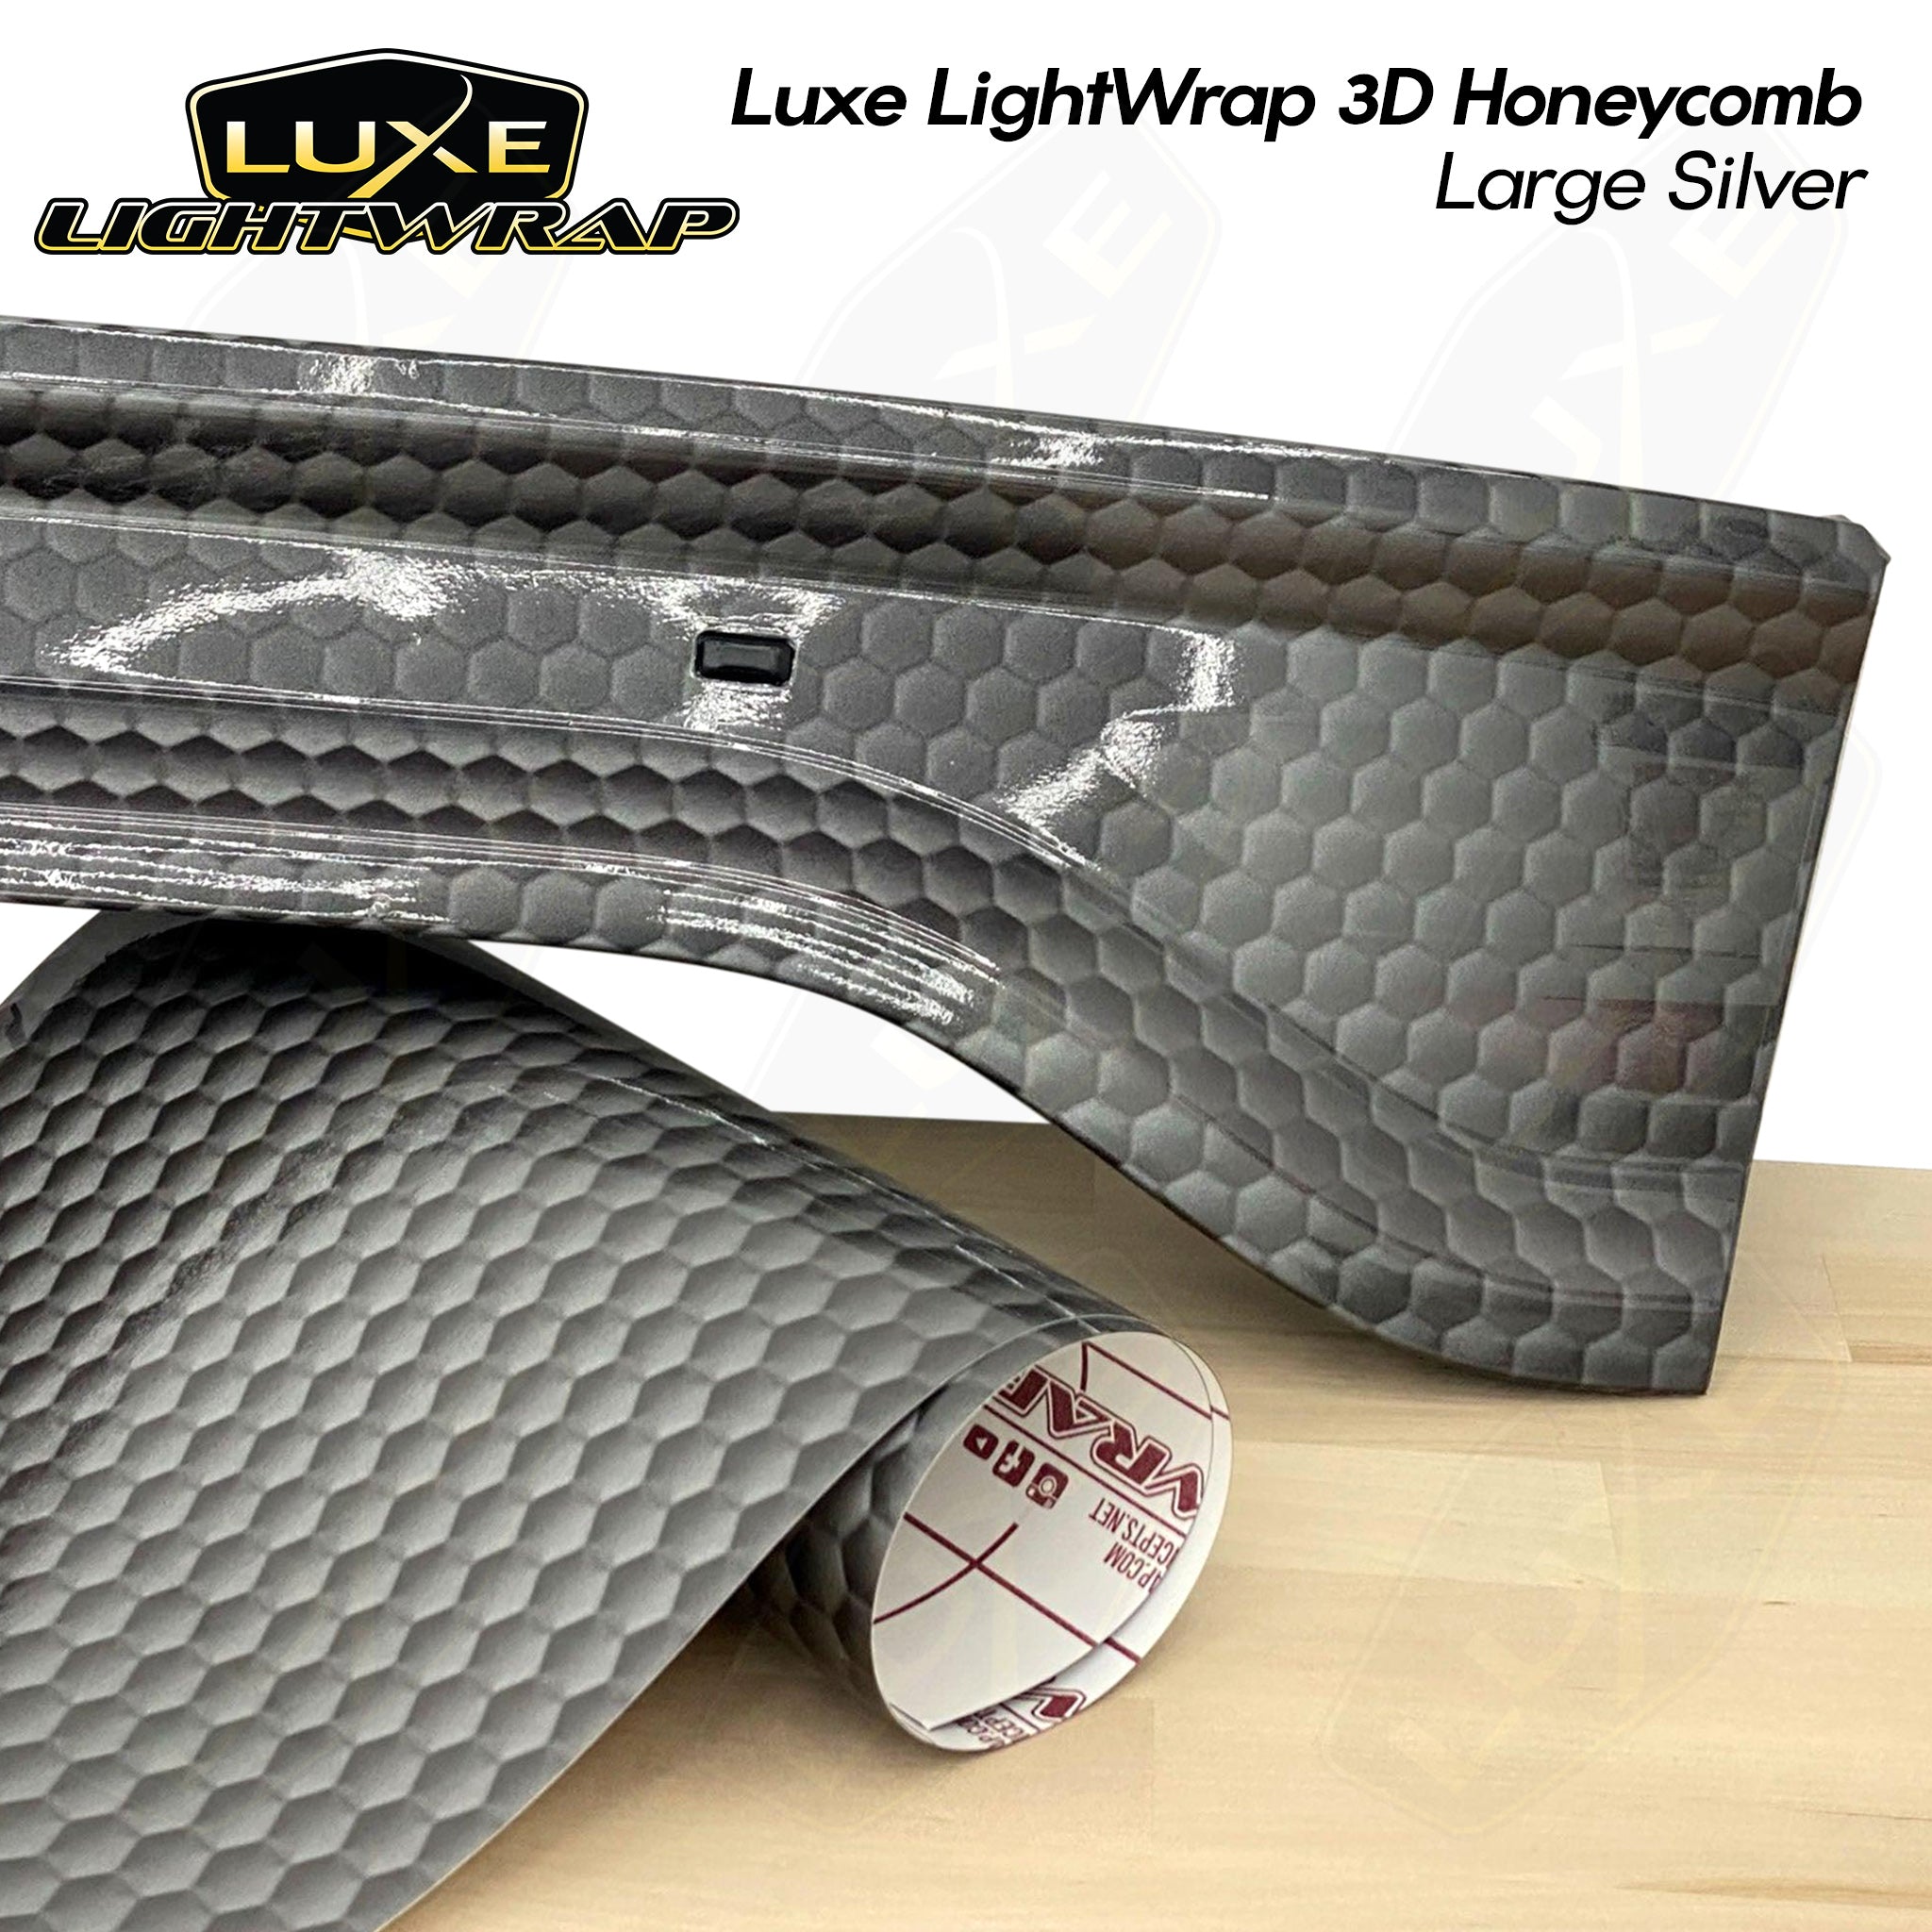 Luxe LightWrap 3D Mid Large Honeycomb